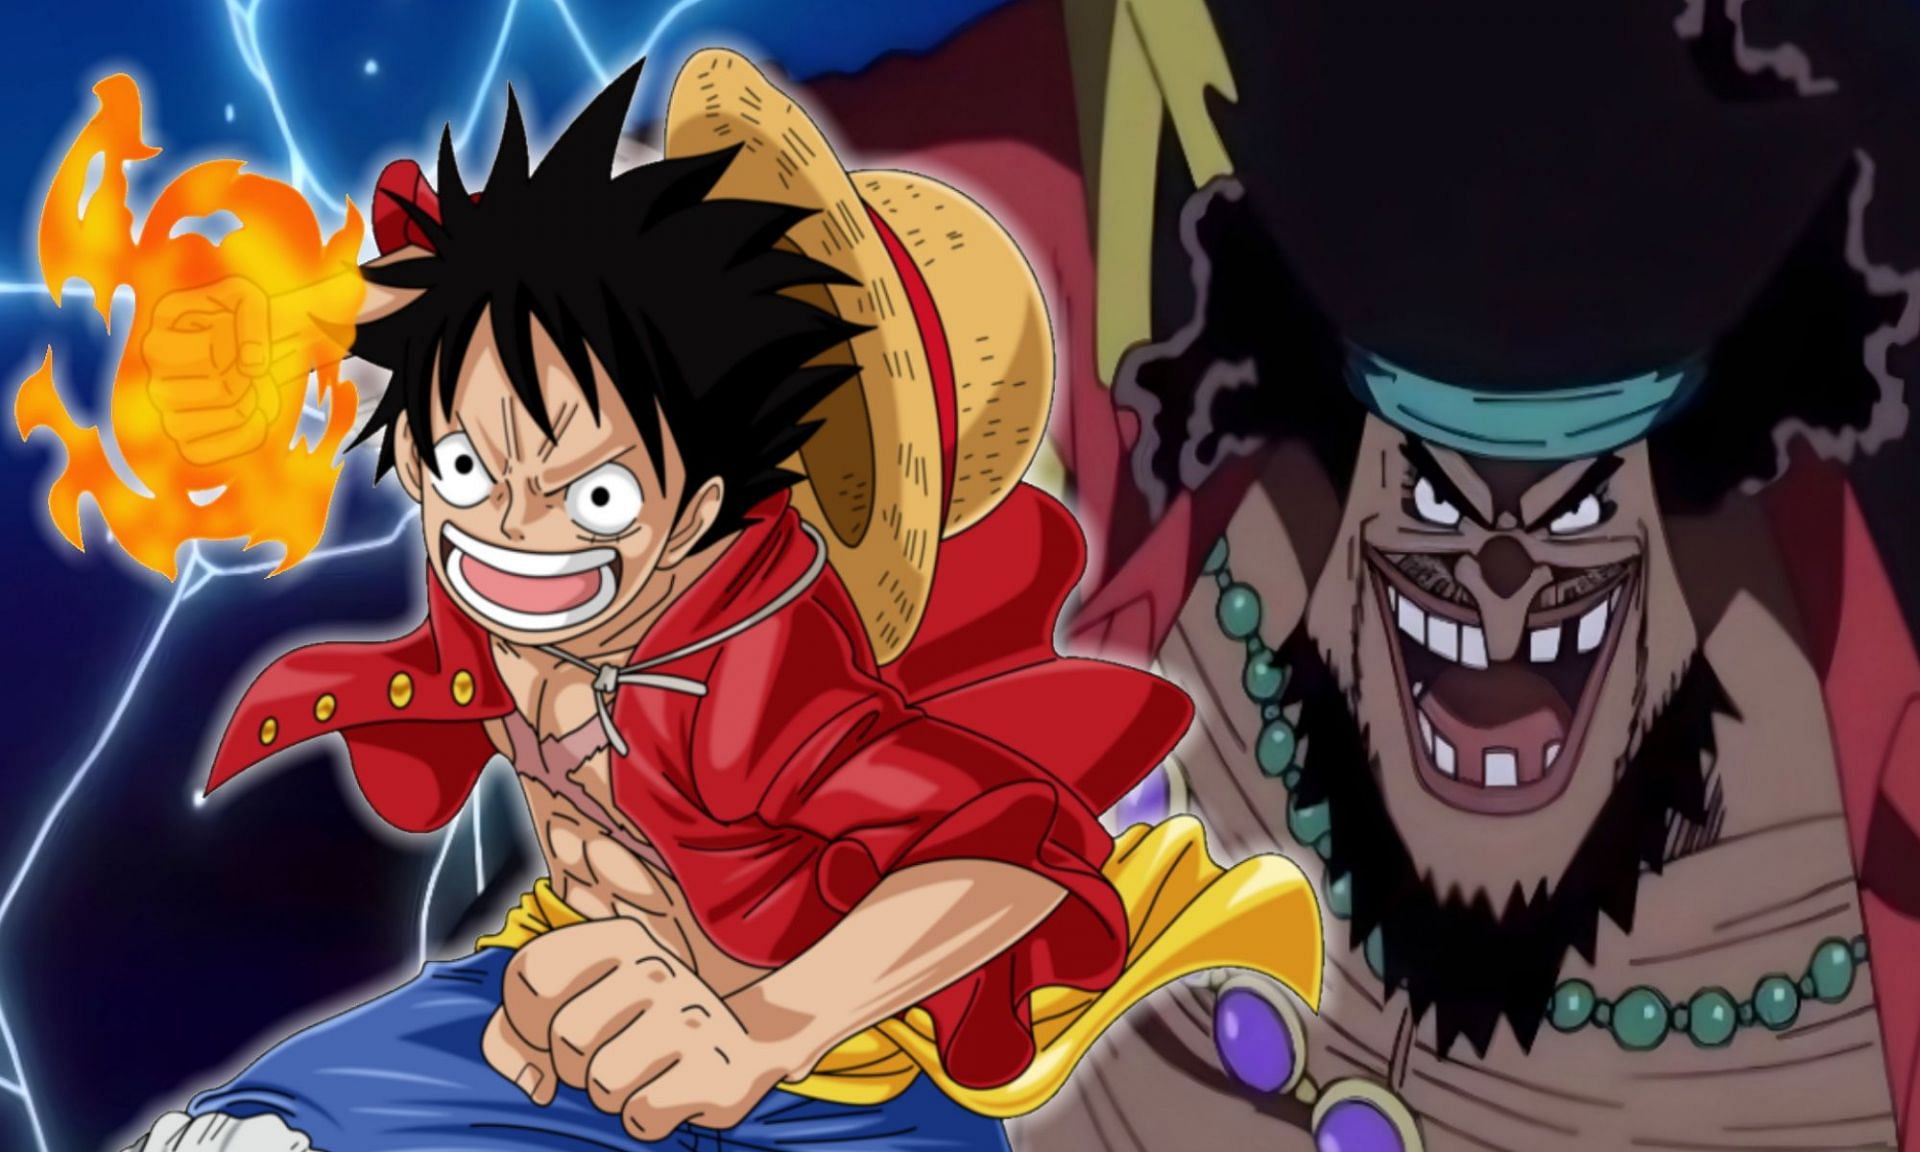 Luffy and Blackbeard are the protagonists of their own story